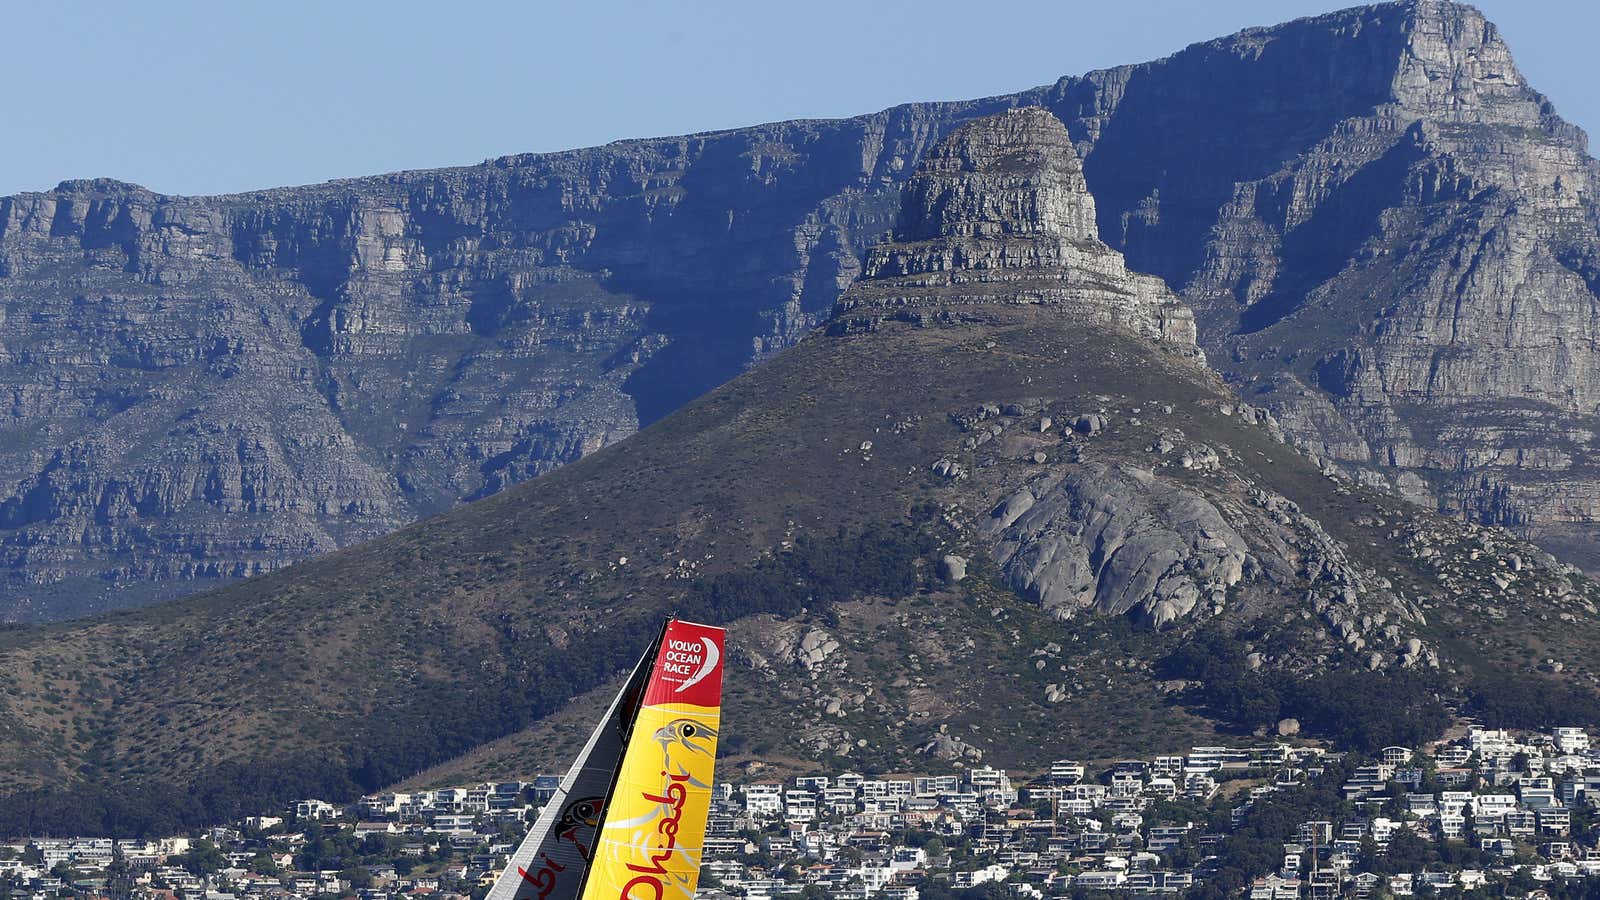 Table Mountain, a popular tourist attraction in South Africa, is one of the seven wonders of thr world.